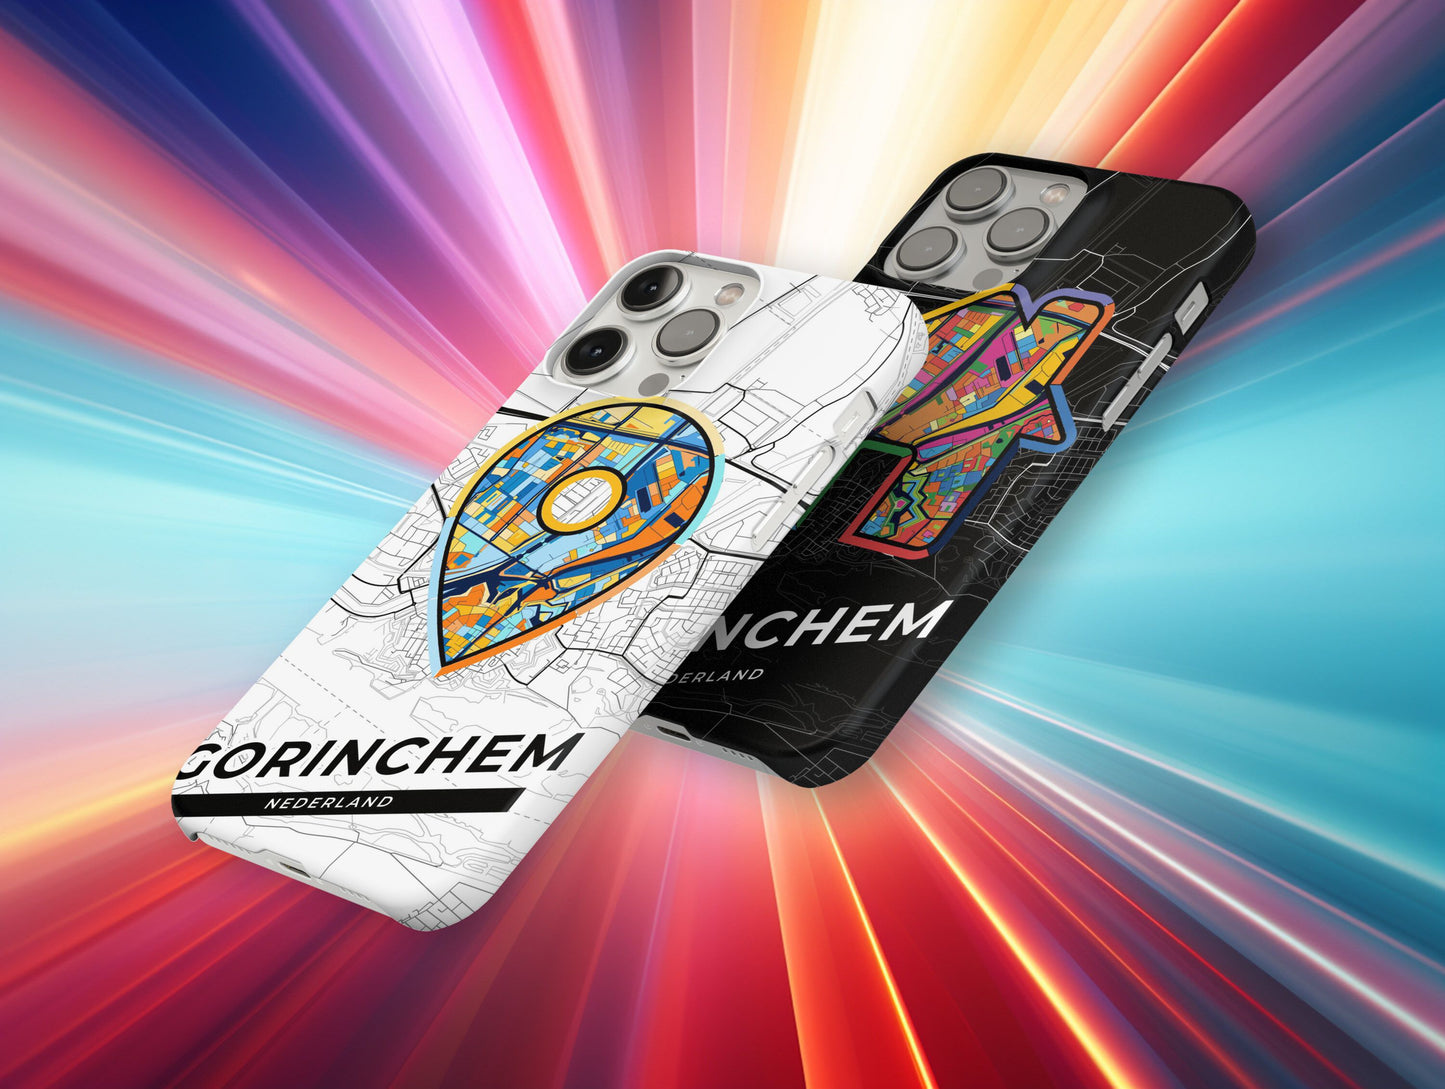 Gorinchem Netherlands slim phone case with colorful icon. Birthday, wedding or housewarming gift. Couple match cases.